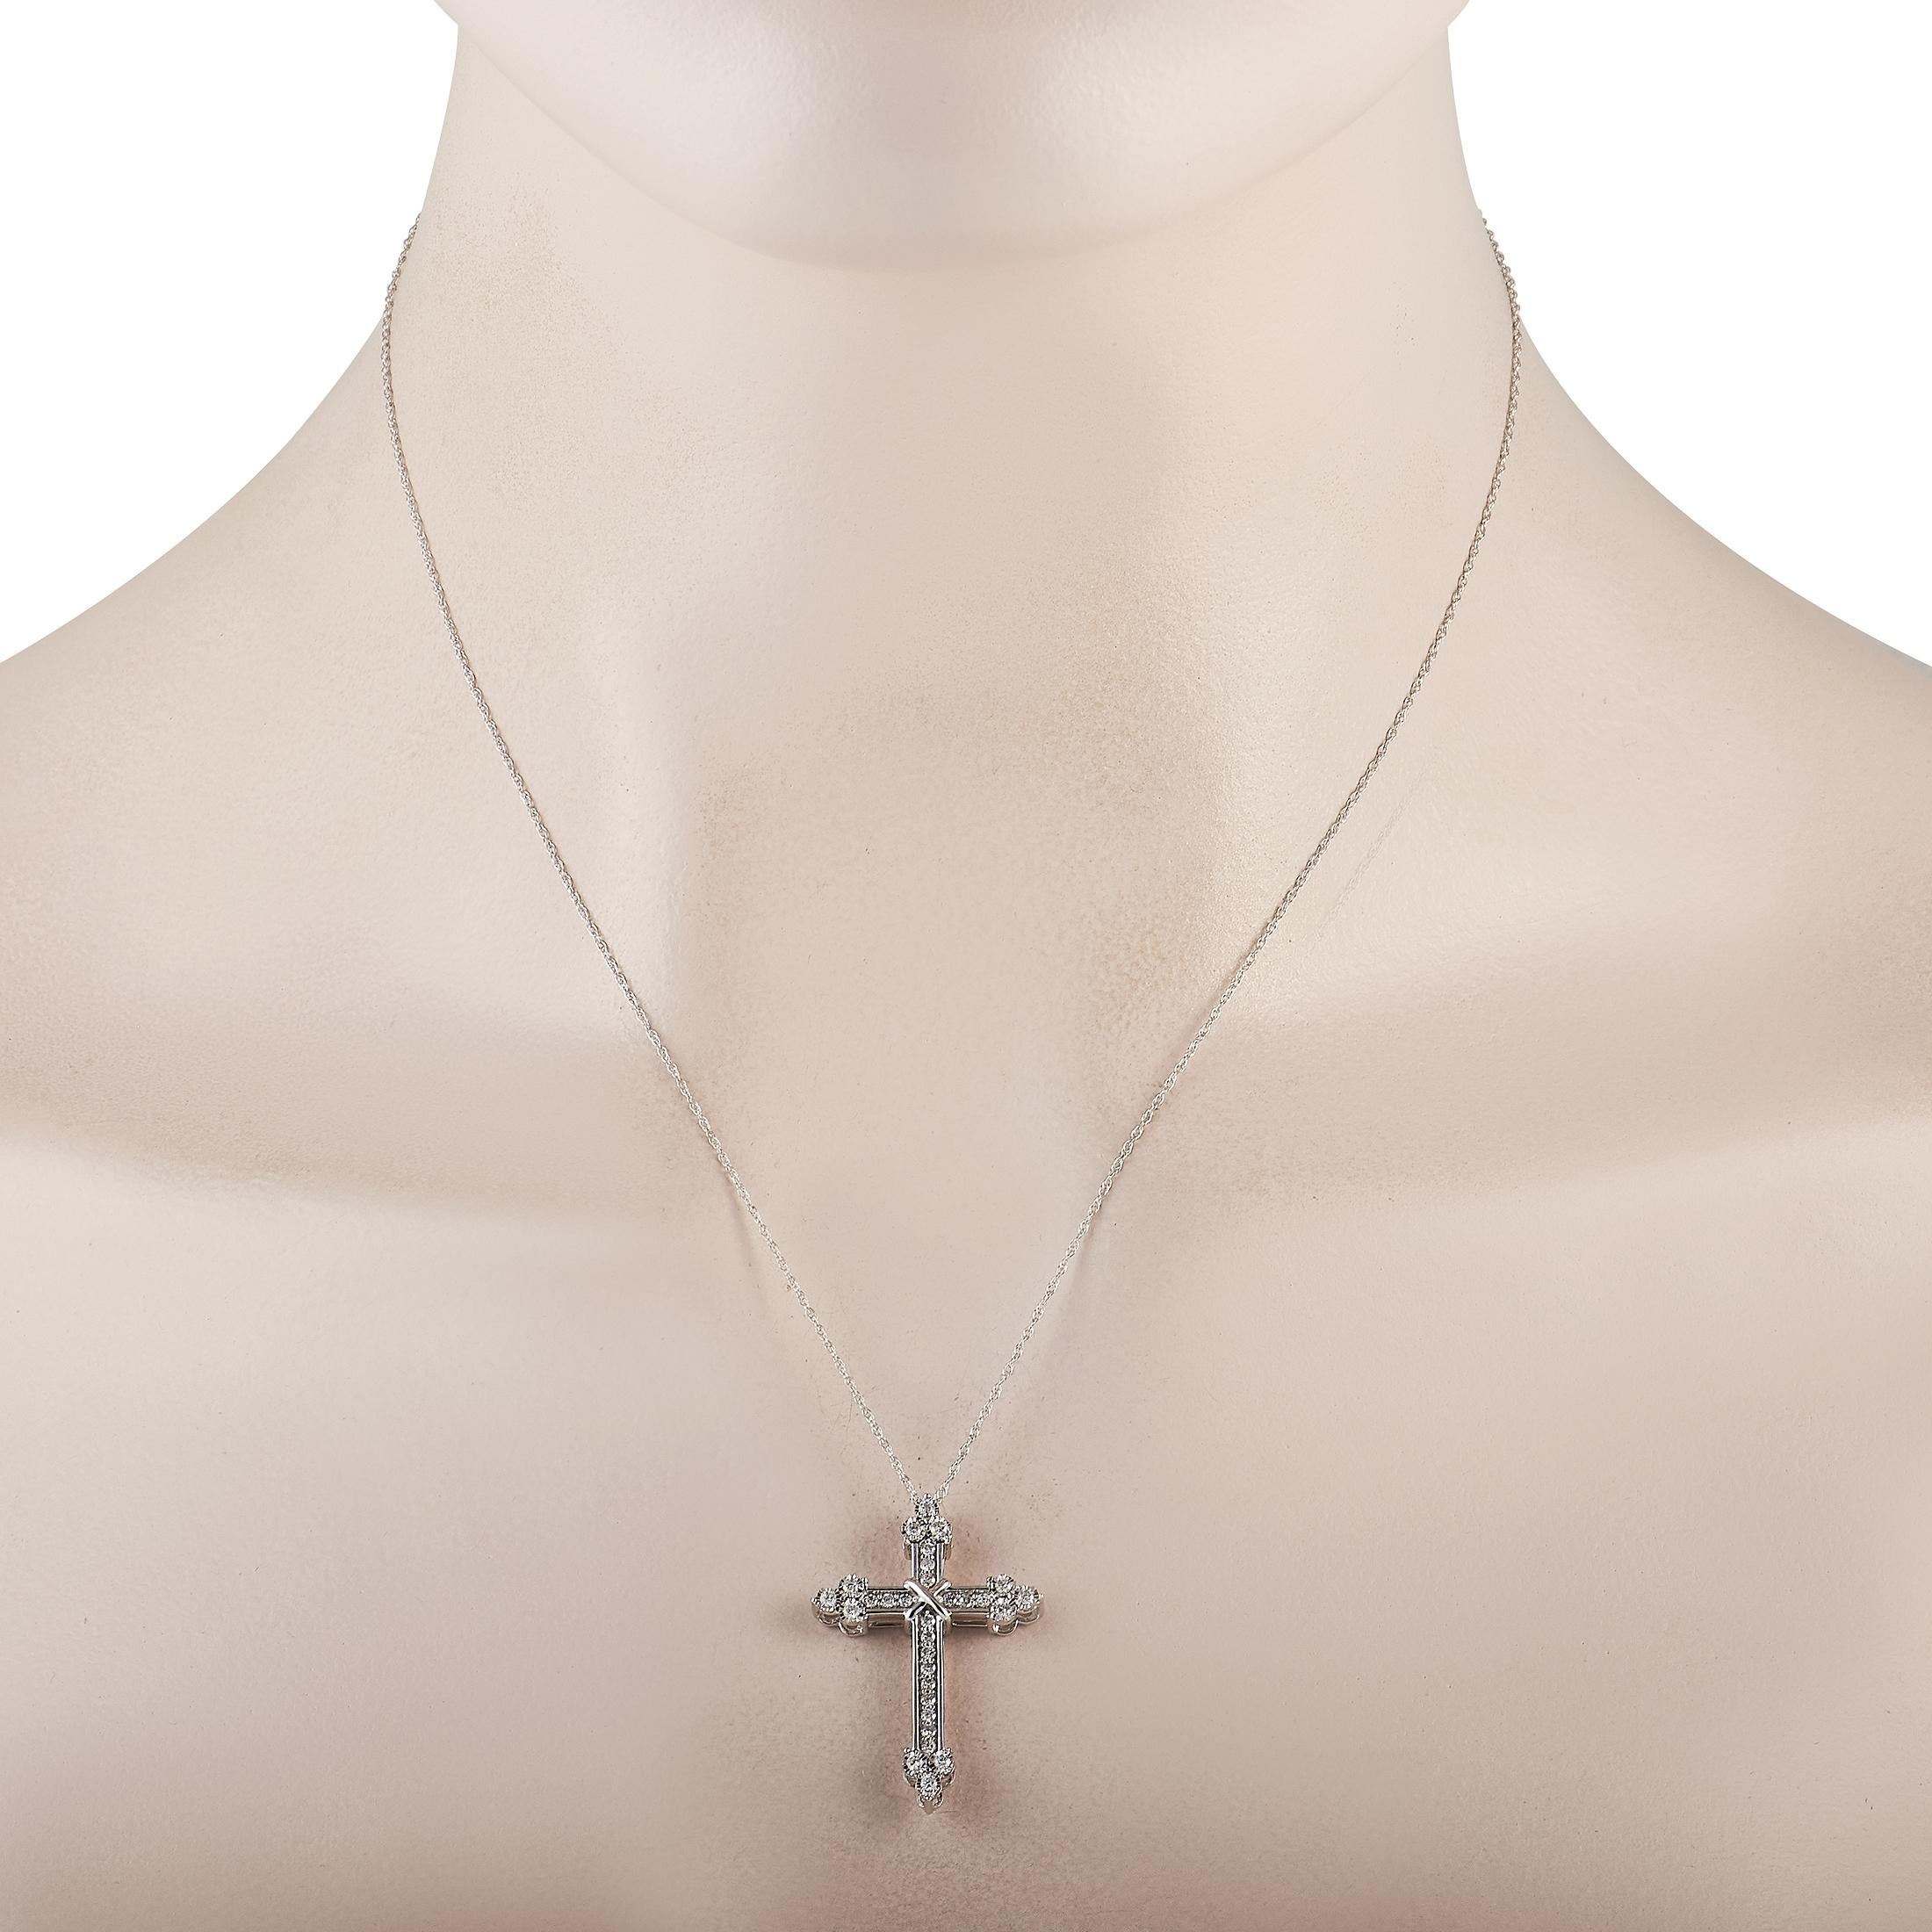 The perfect visible symbol of your belief. This white gold necklace would prove to be as bright and lasting as your faith. It features a diamond-adorned cross pendant measuring 1.25